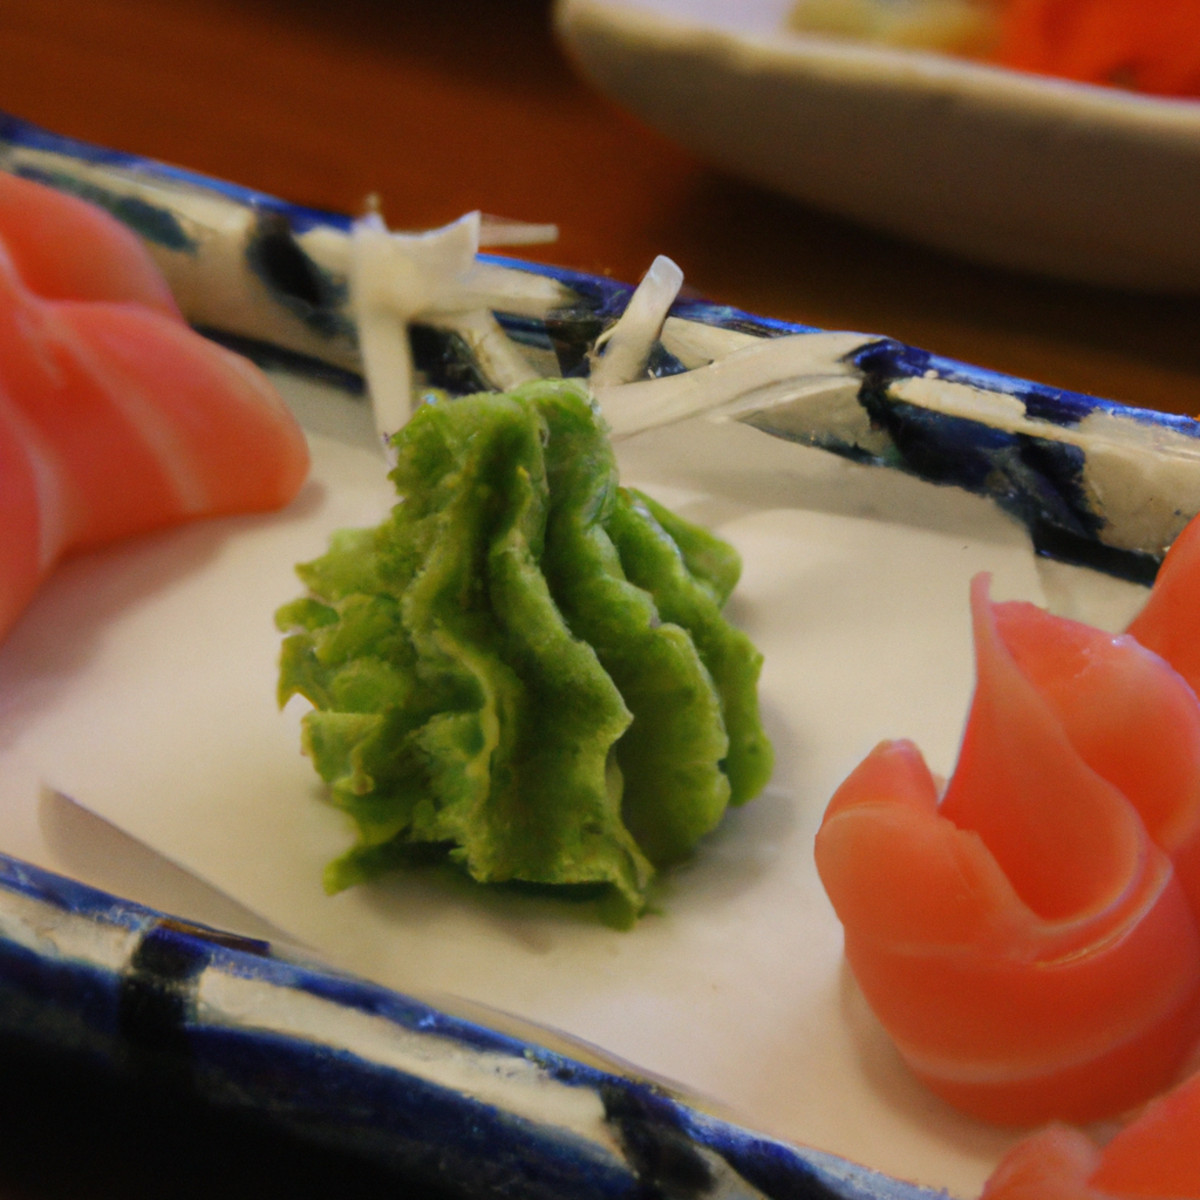 Wasabi- Discover The Secrets of the Spicy Green Paste